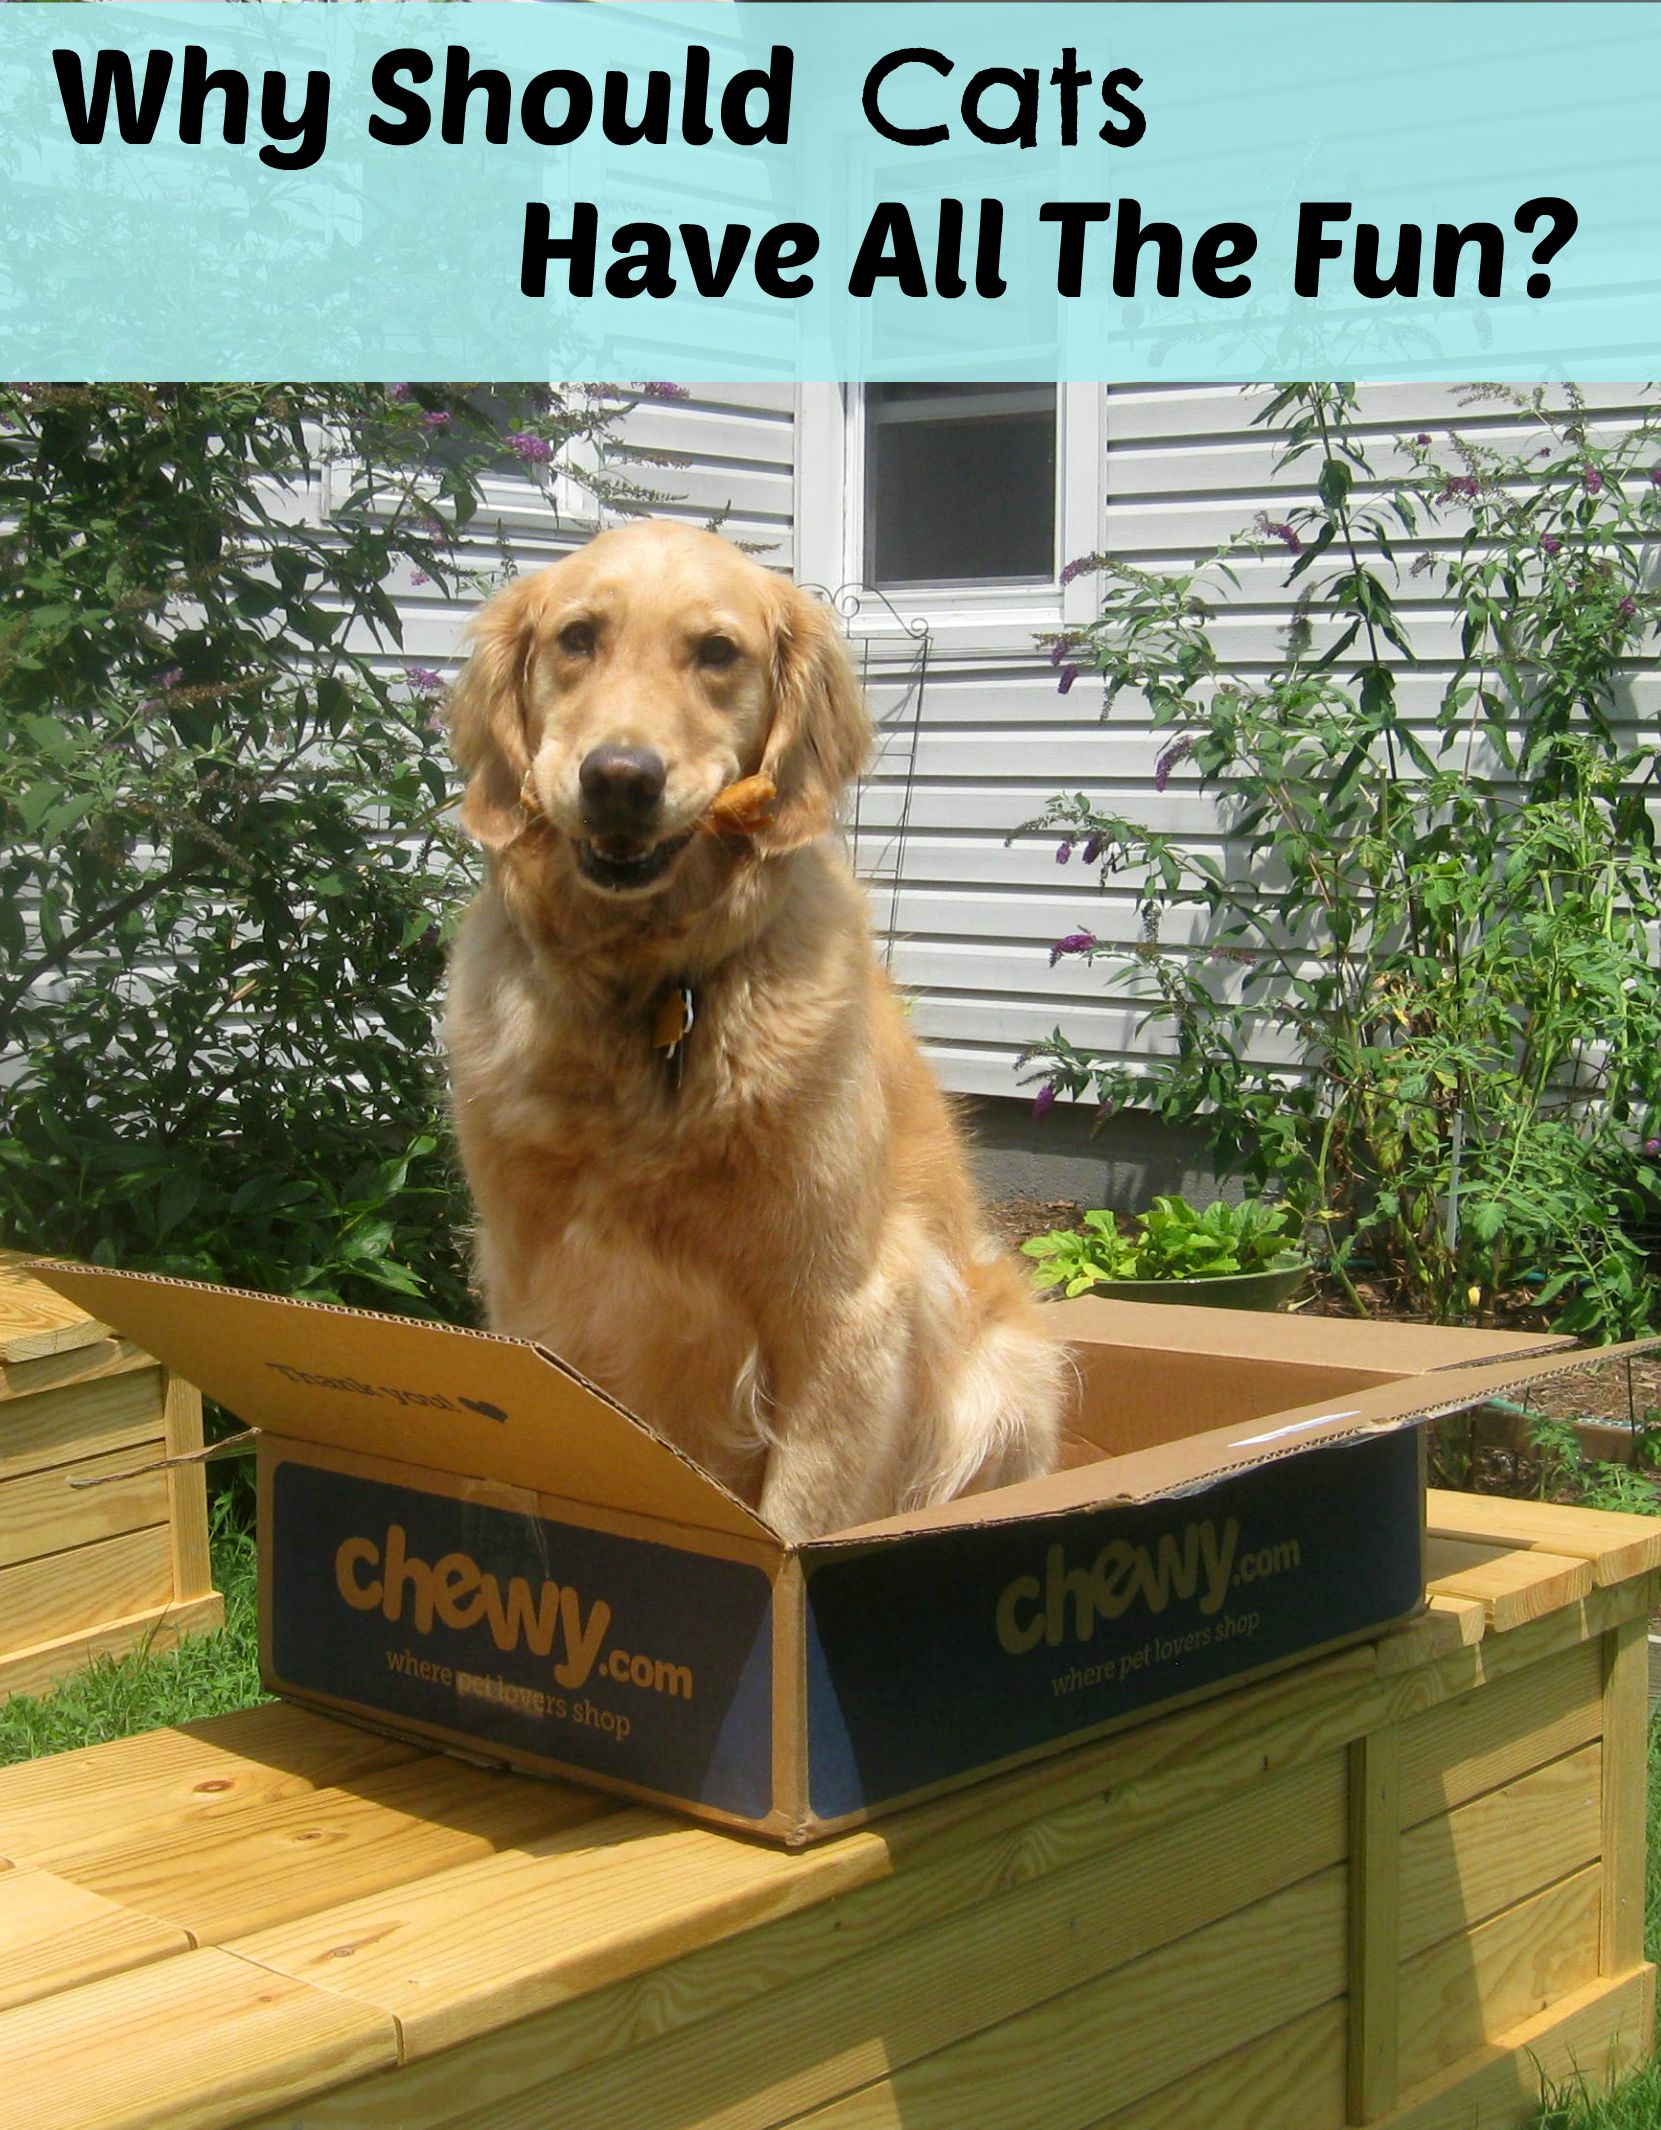 A golden retriever in a box asks why cats should have all the fun.